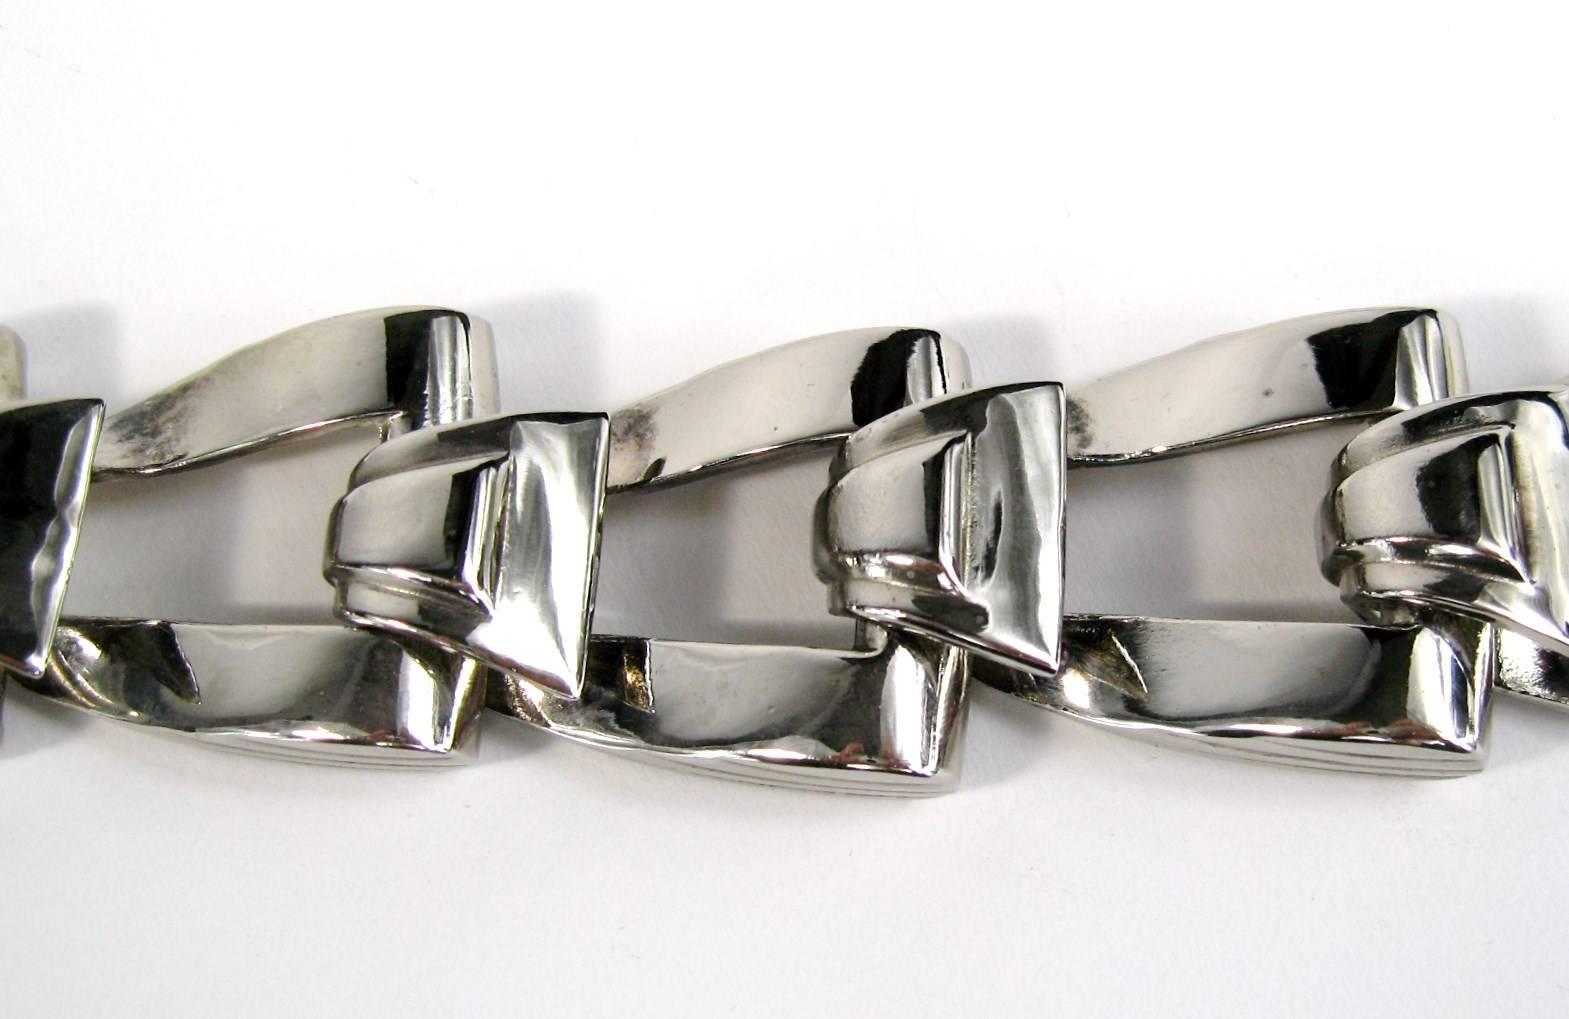 Great large Givenchy link bracelet. Fold over closure. Measuring 1.11 inches wide. 9-1/4 long end to end. Will fit a 7-8 inch wrist nicely. This is out of a massive collection of Hopi, Zuni, Navajo, Southwestern, sterling silver, costume jewelry and